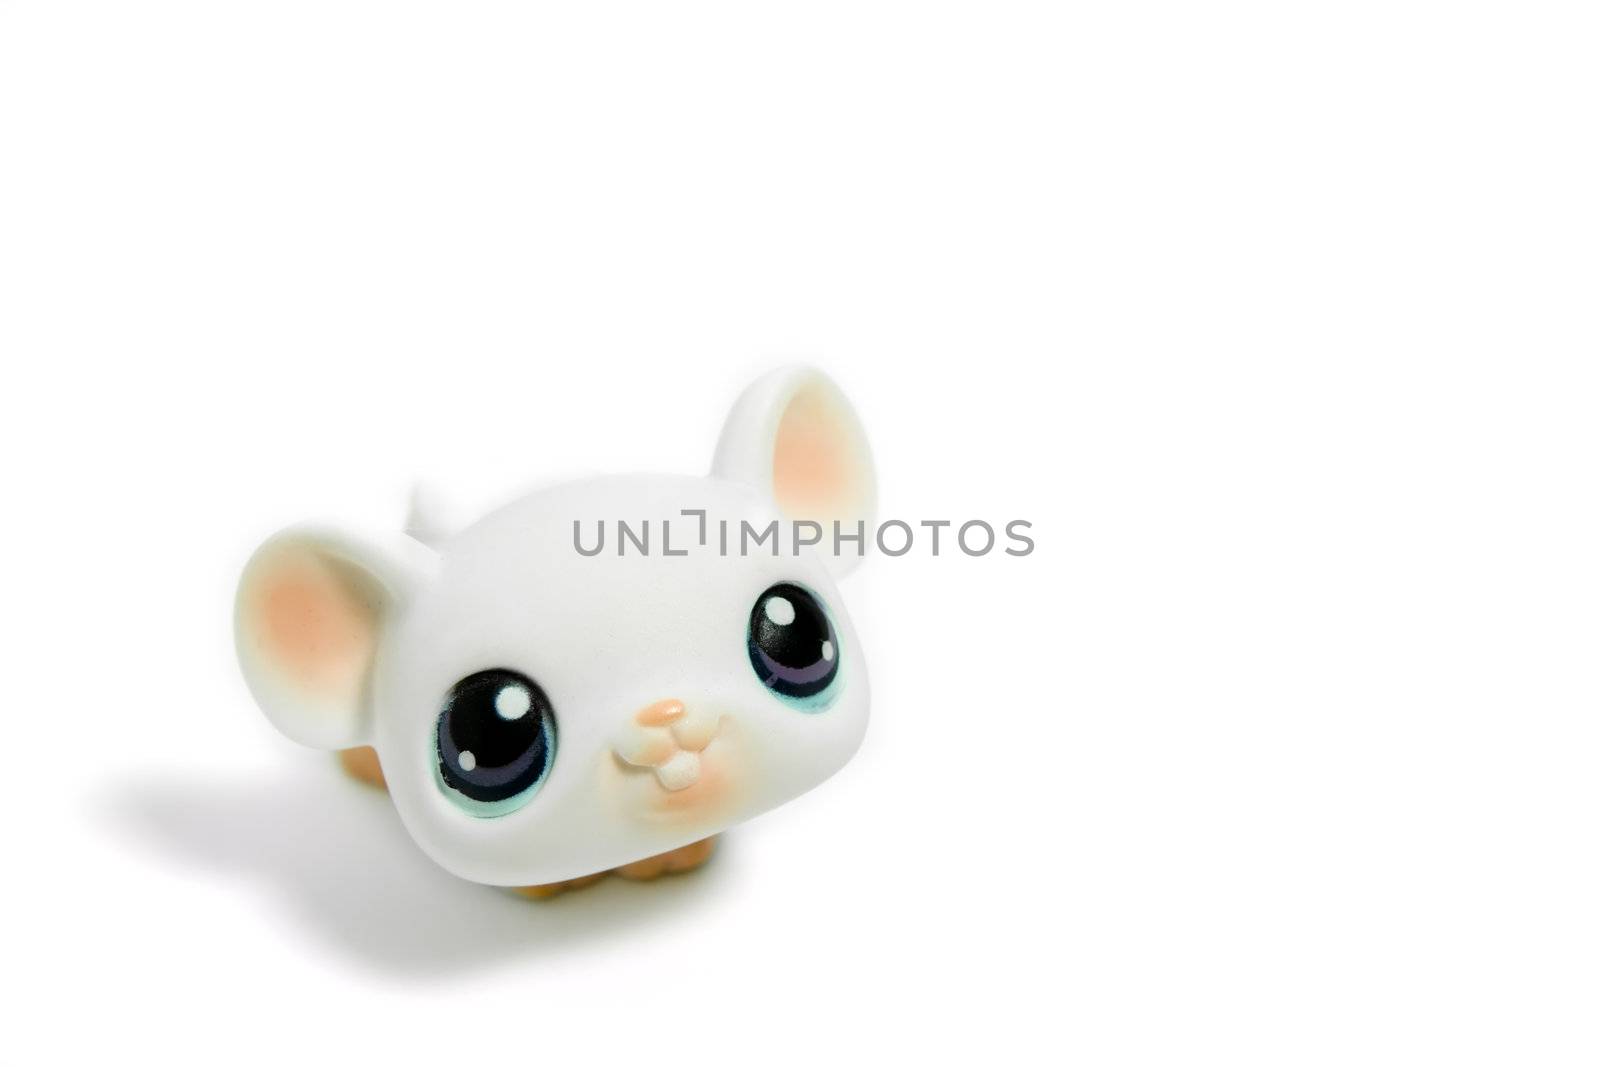 cute toy mouse with big eyes, isolated on white